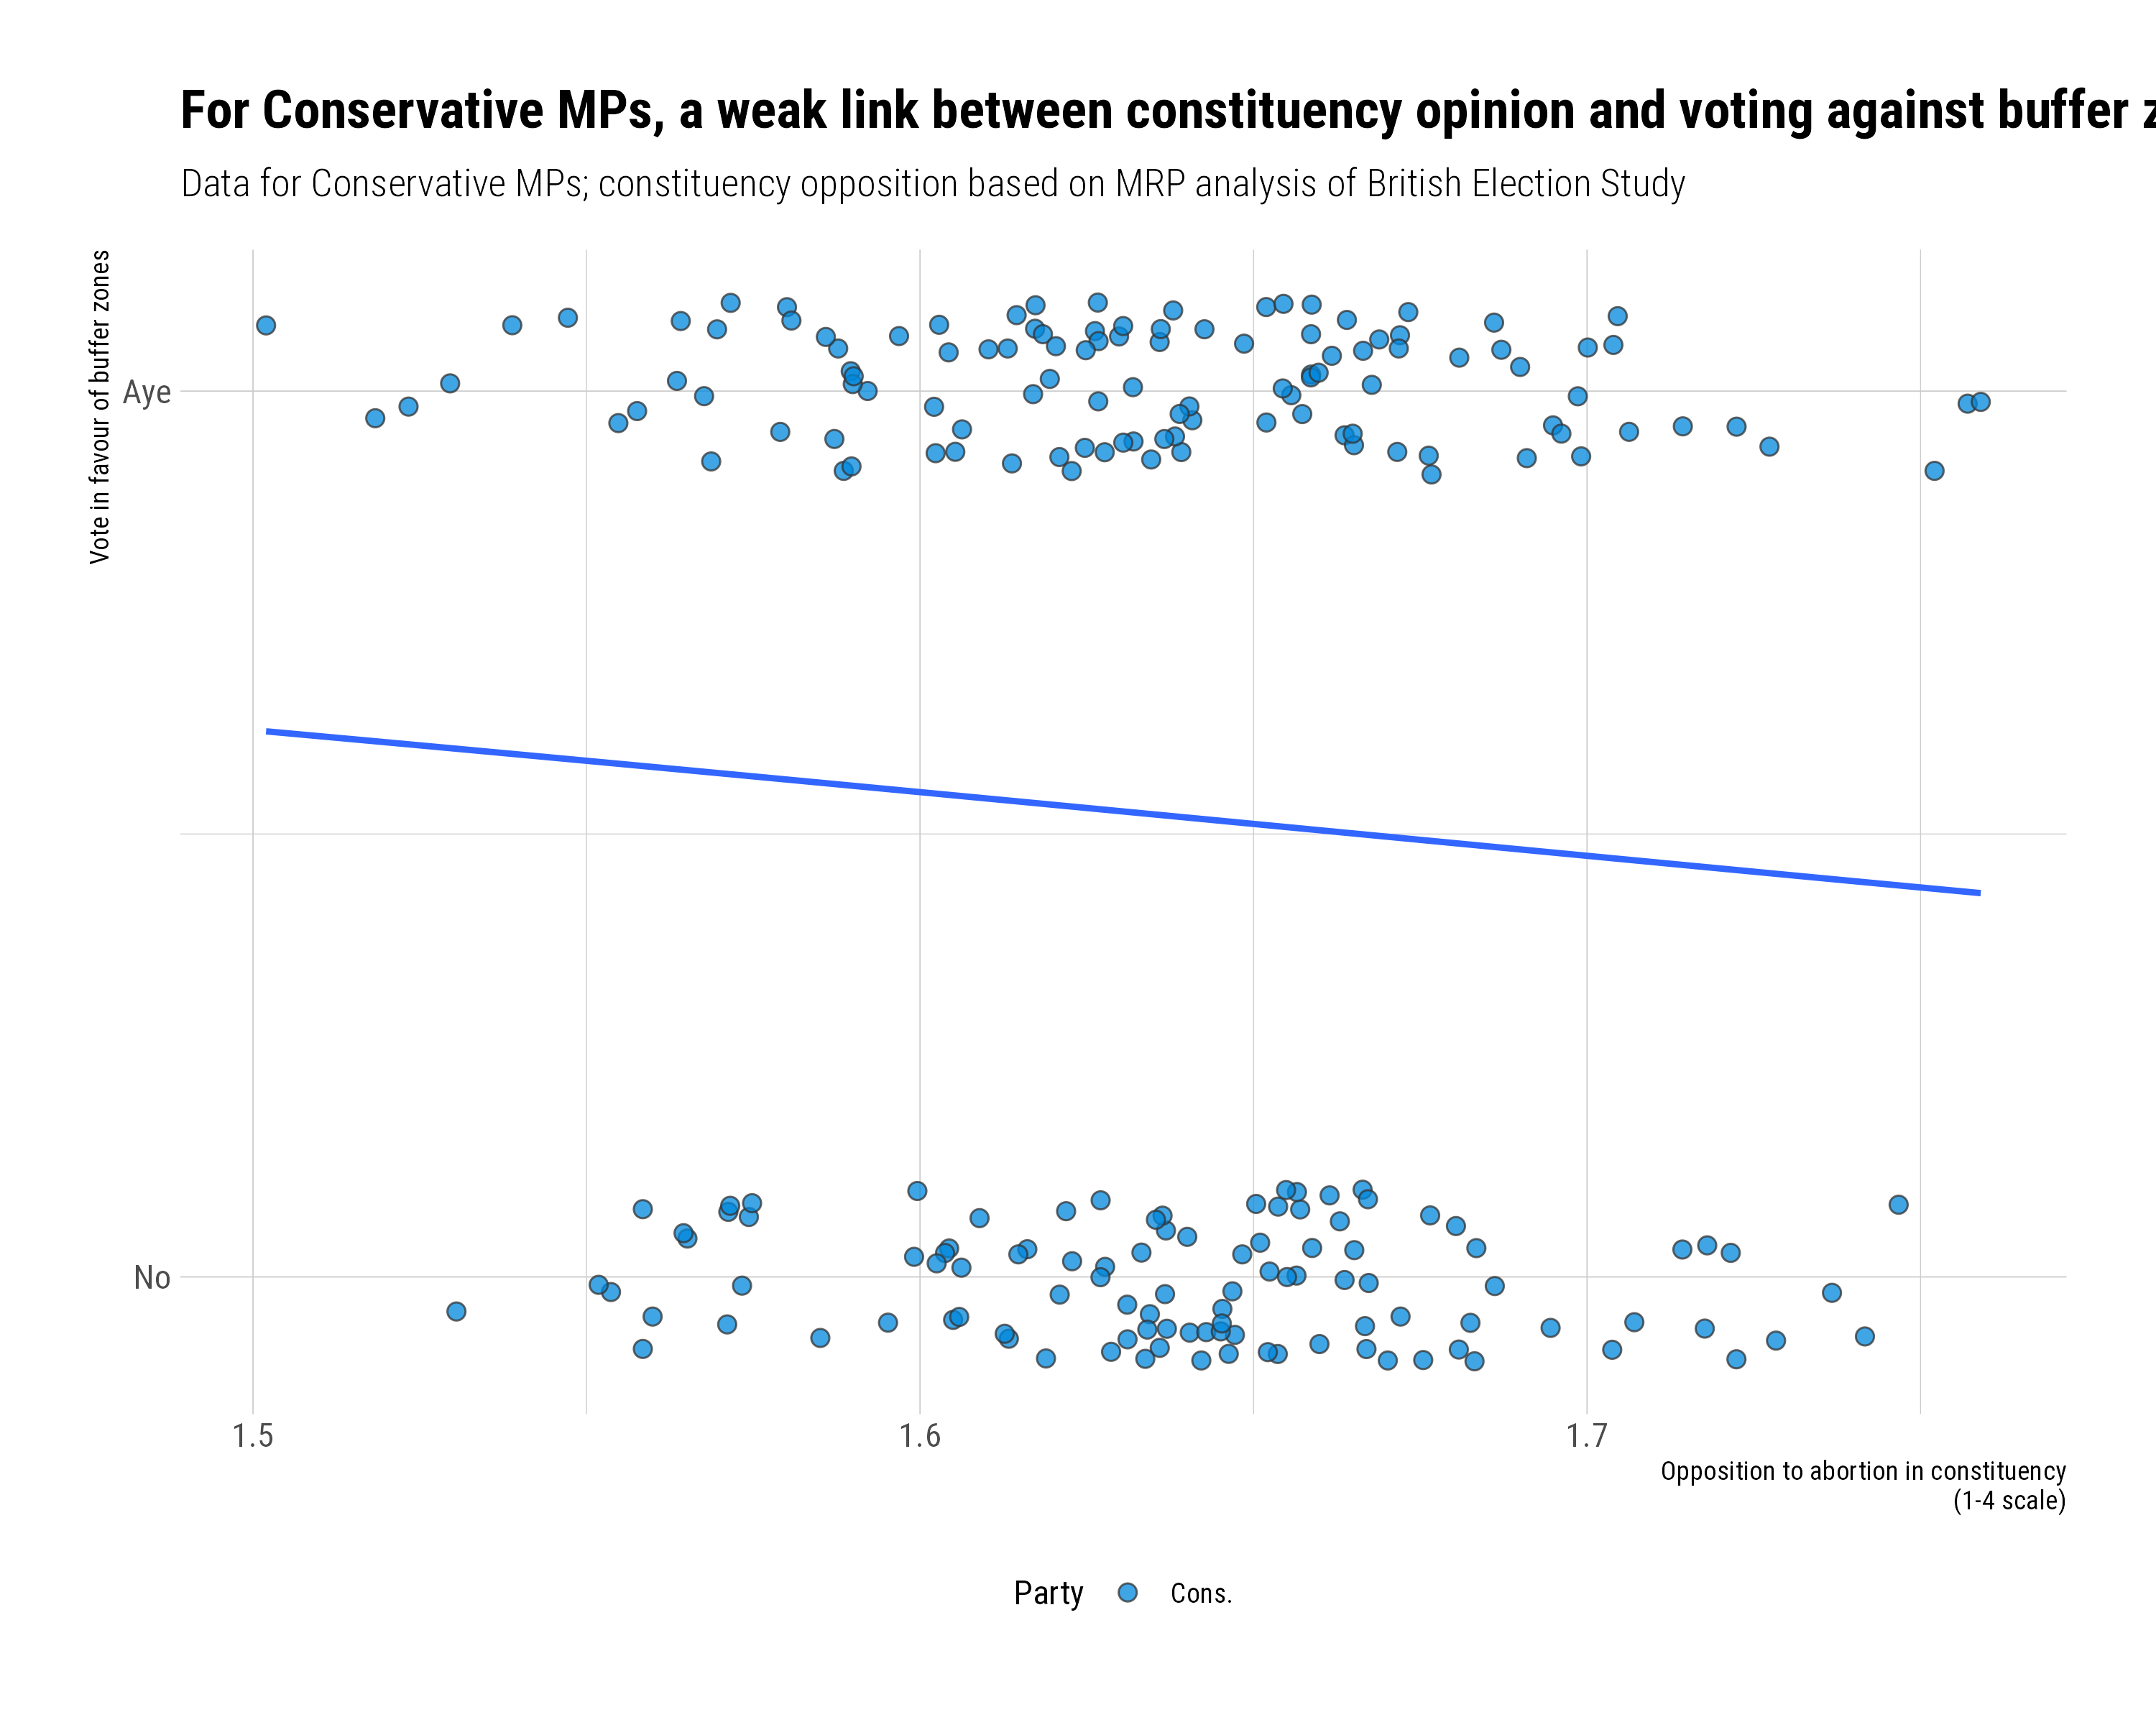 Relationship between constituency opinion and MPs' votes, Conservative MPs only